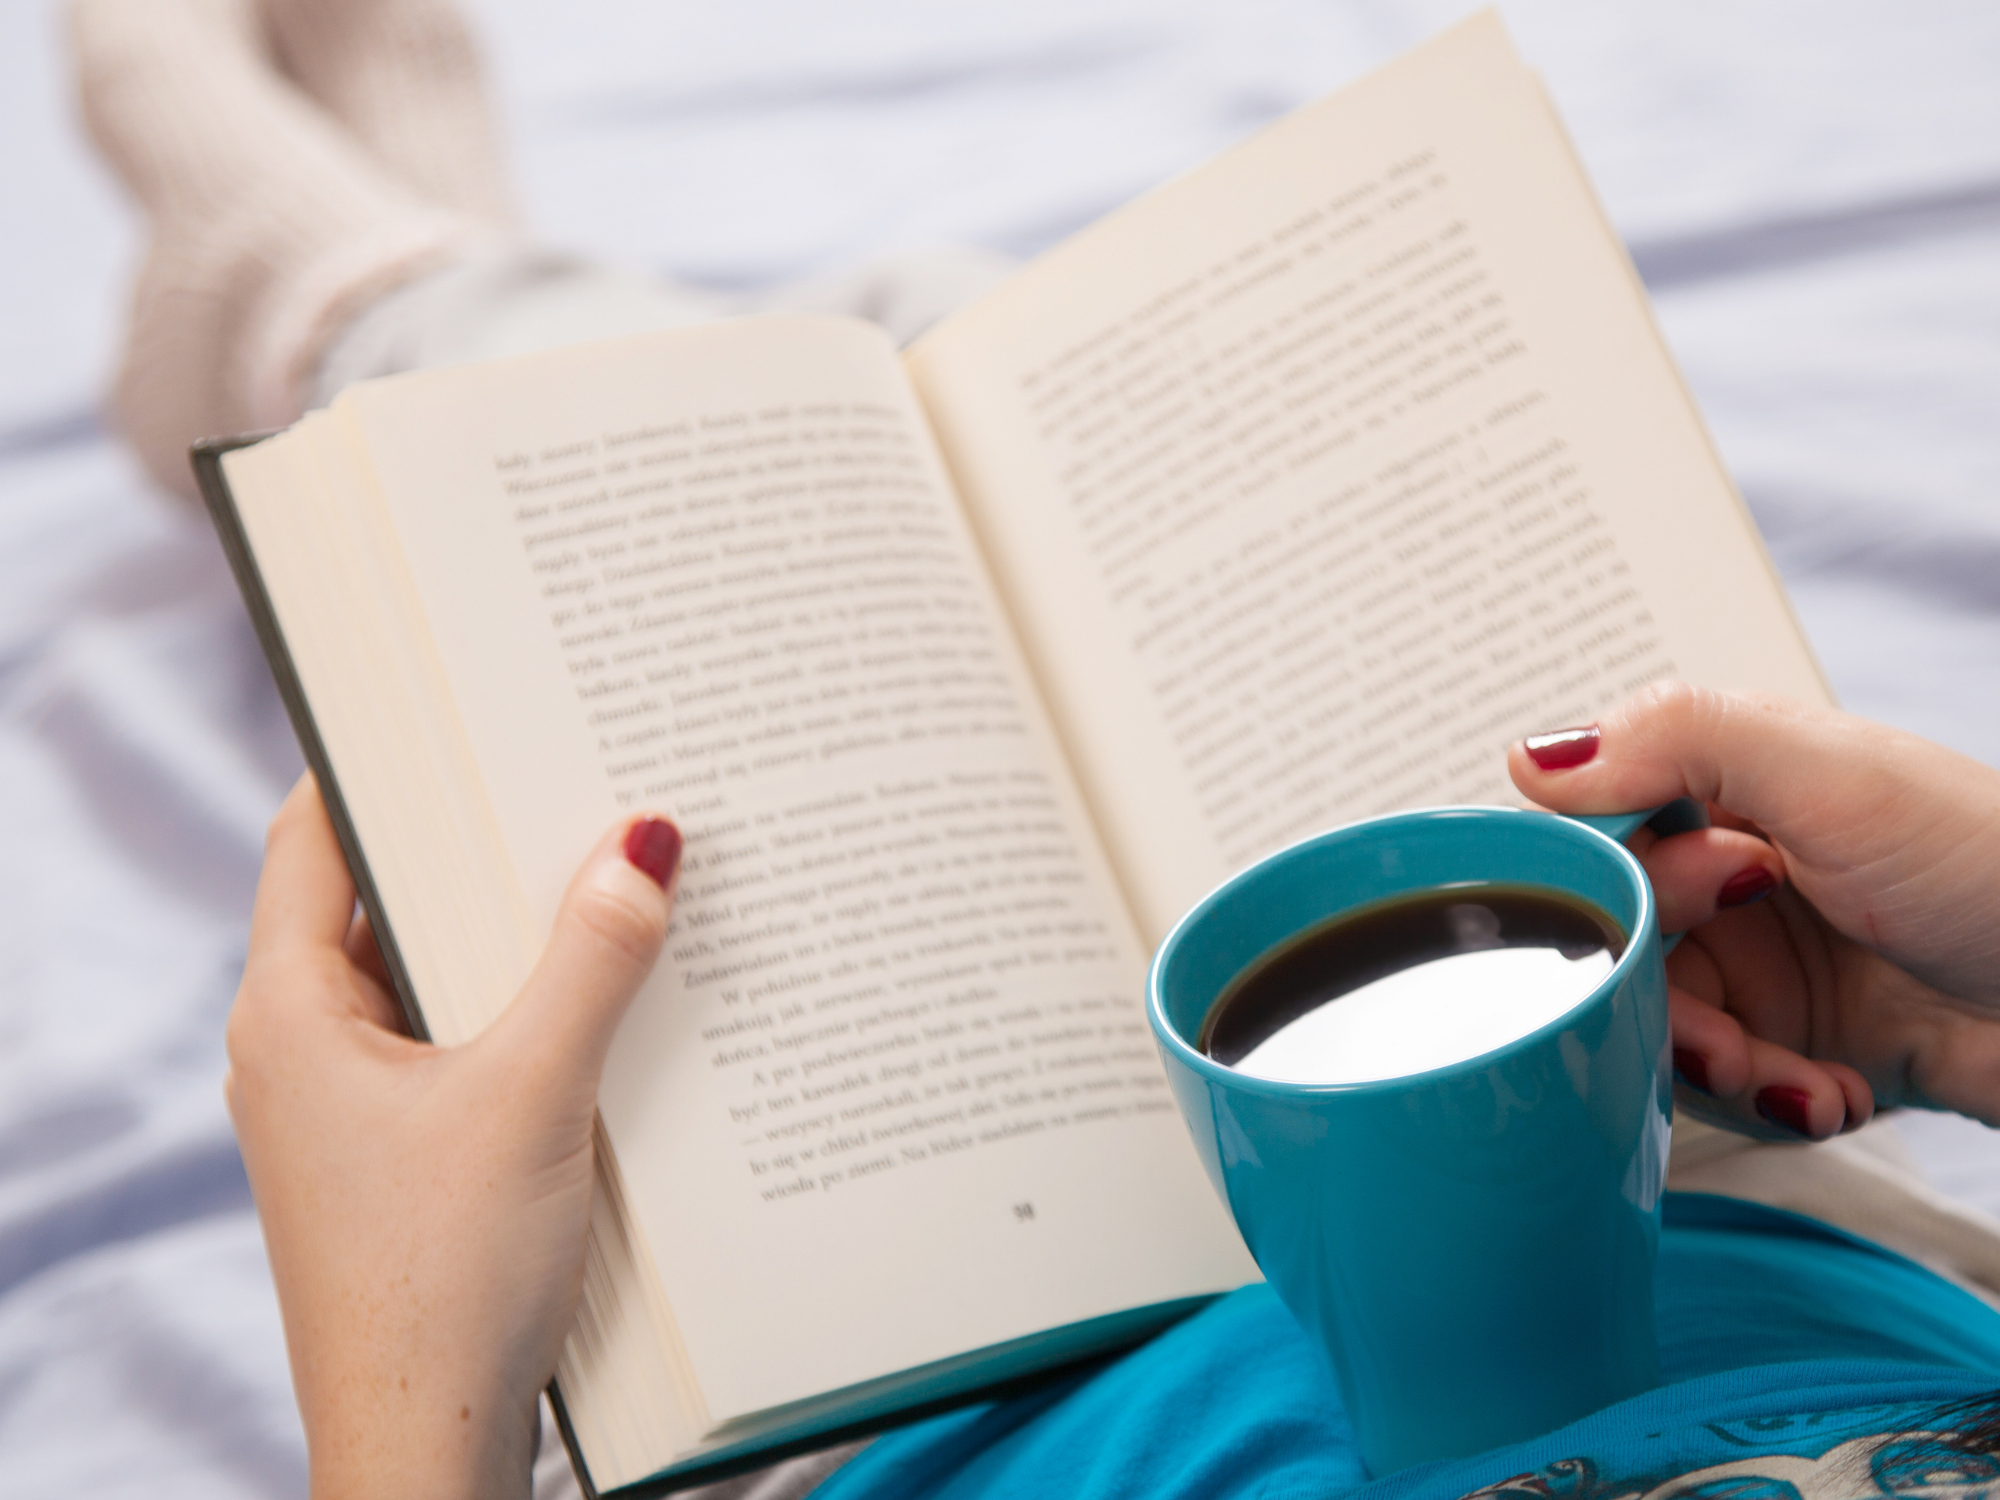 Book and coffee for social media breaks